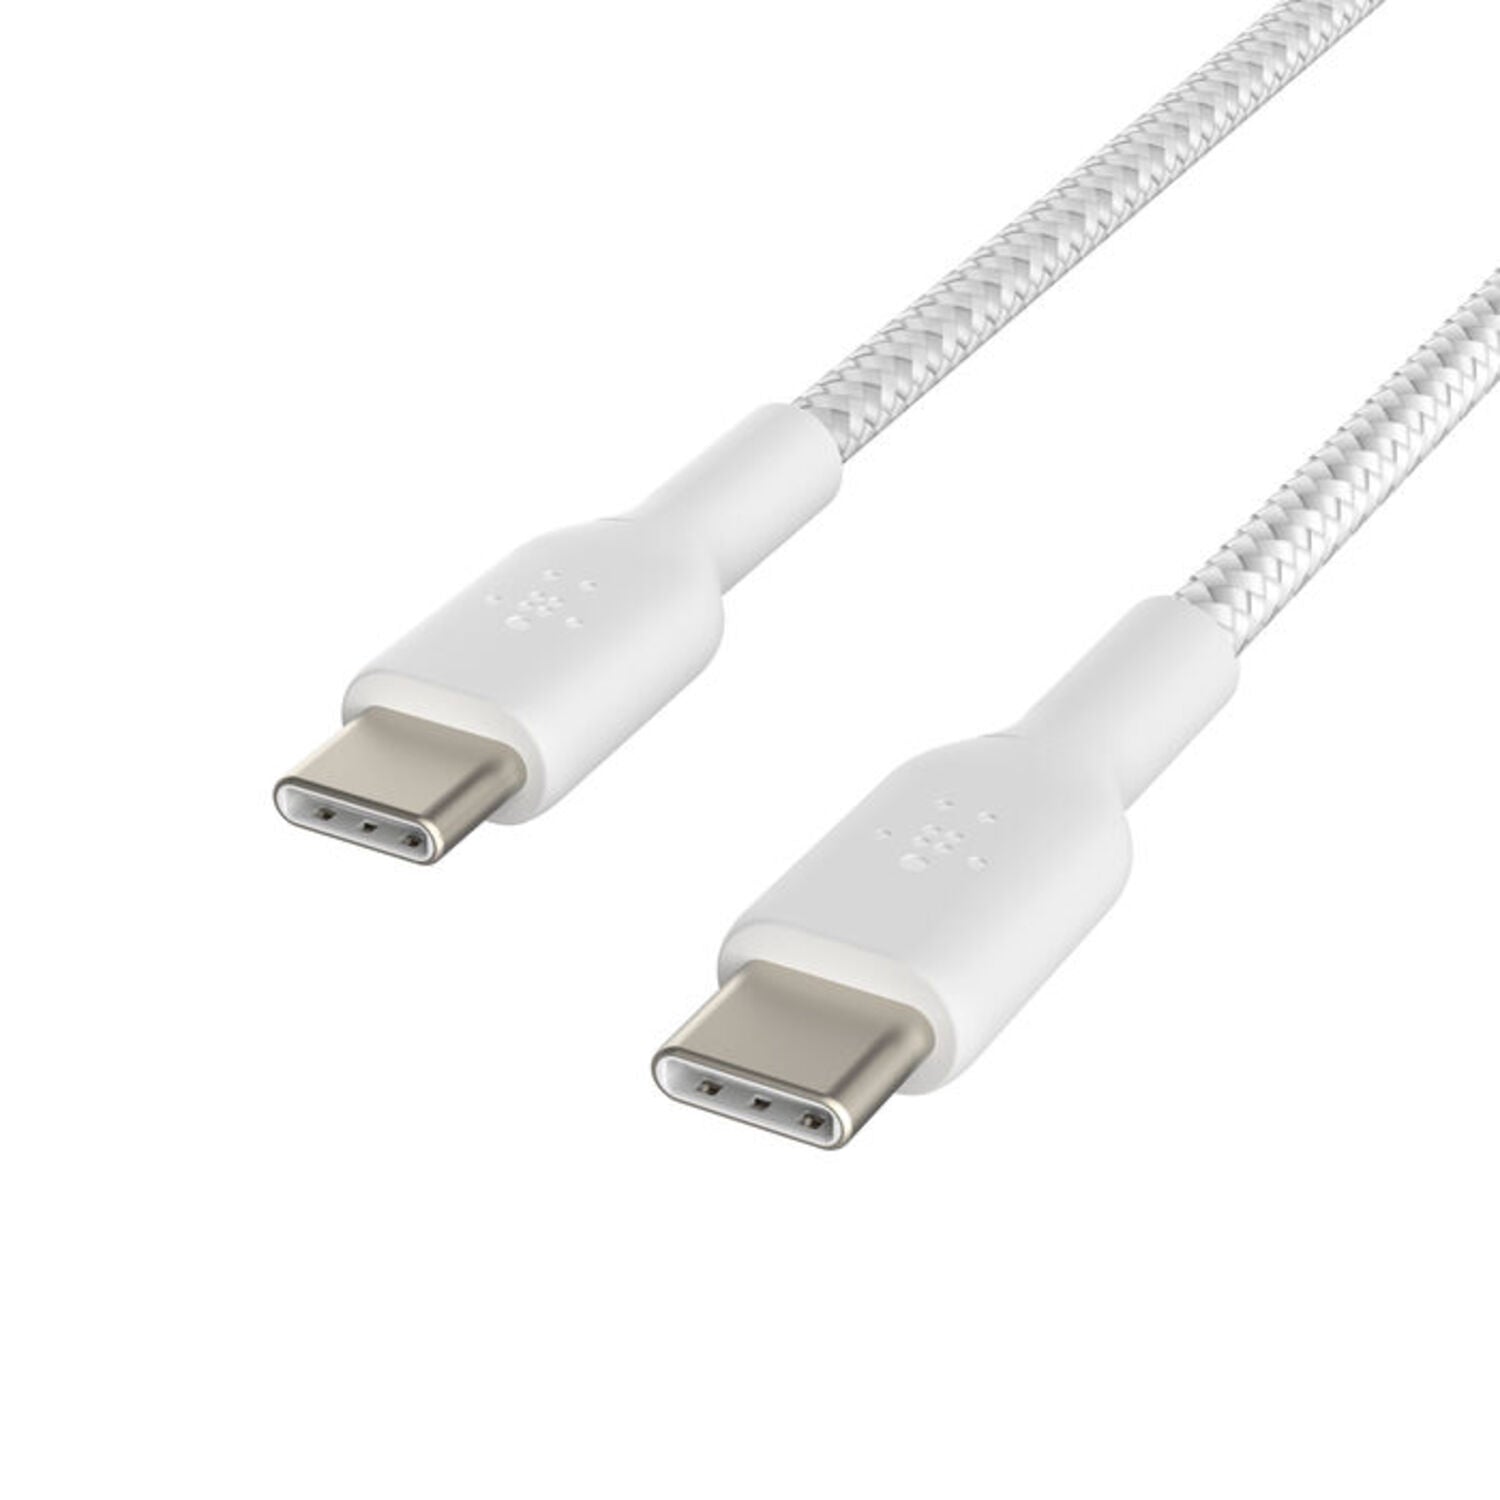 BOOST↑CHARGE™ Cable trenzado USB-C a USB-C